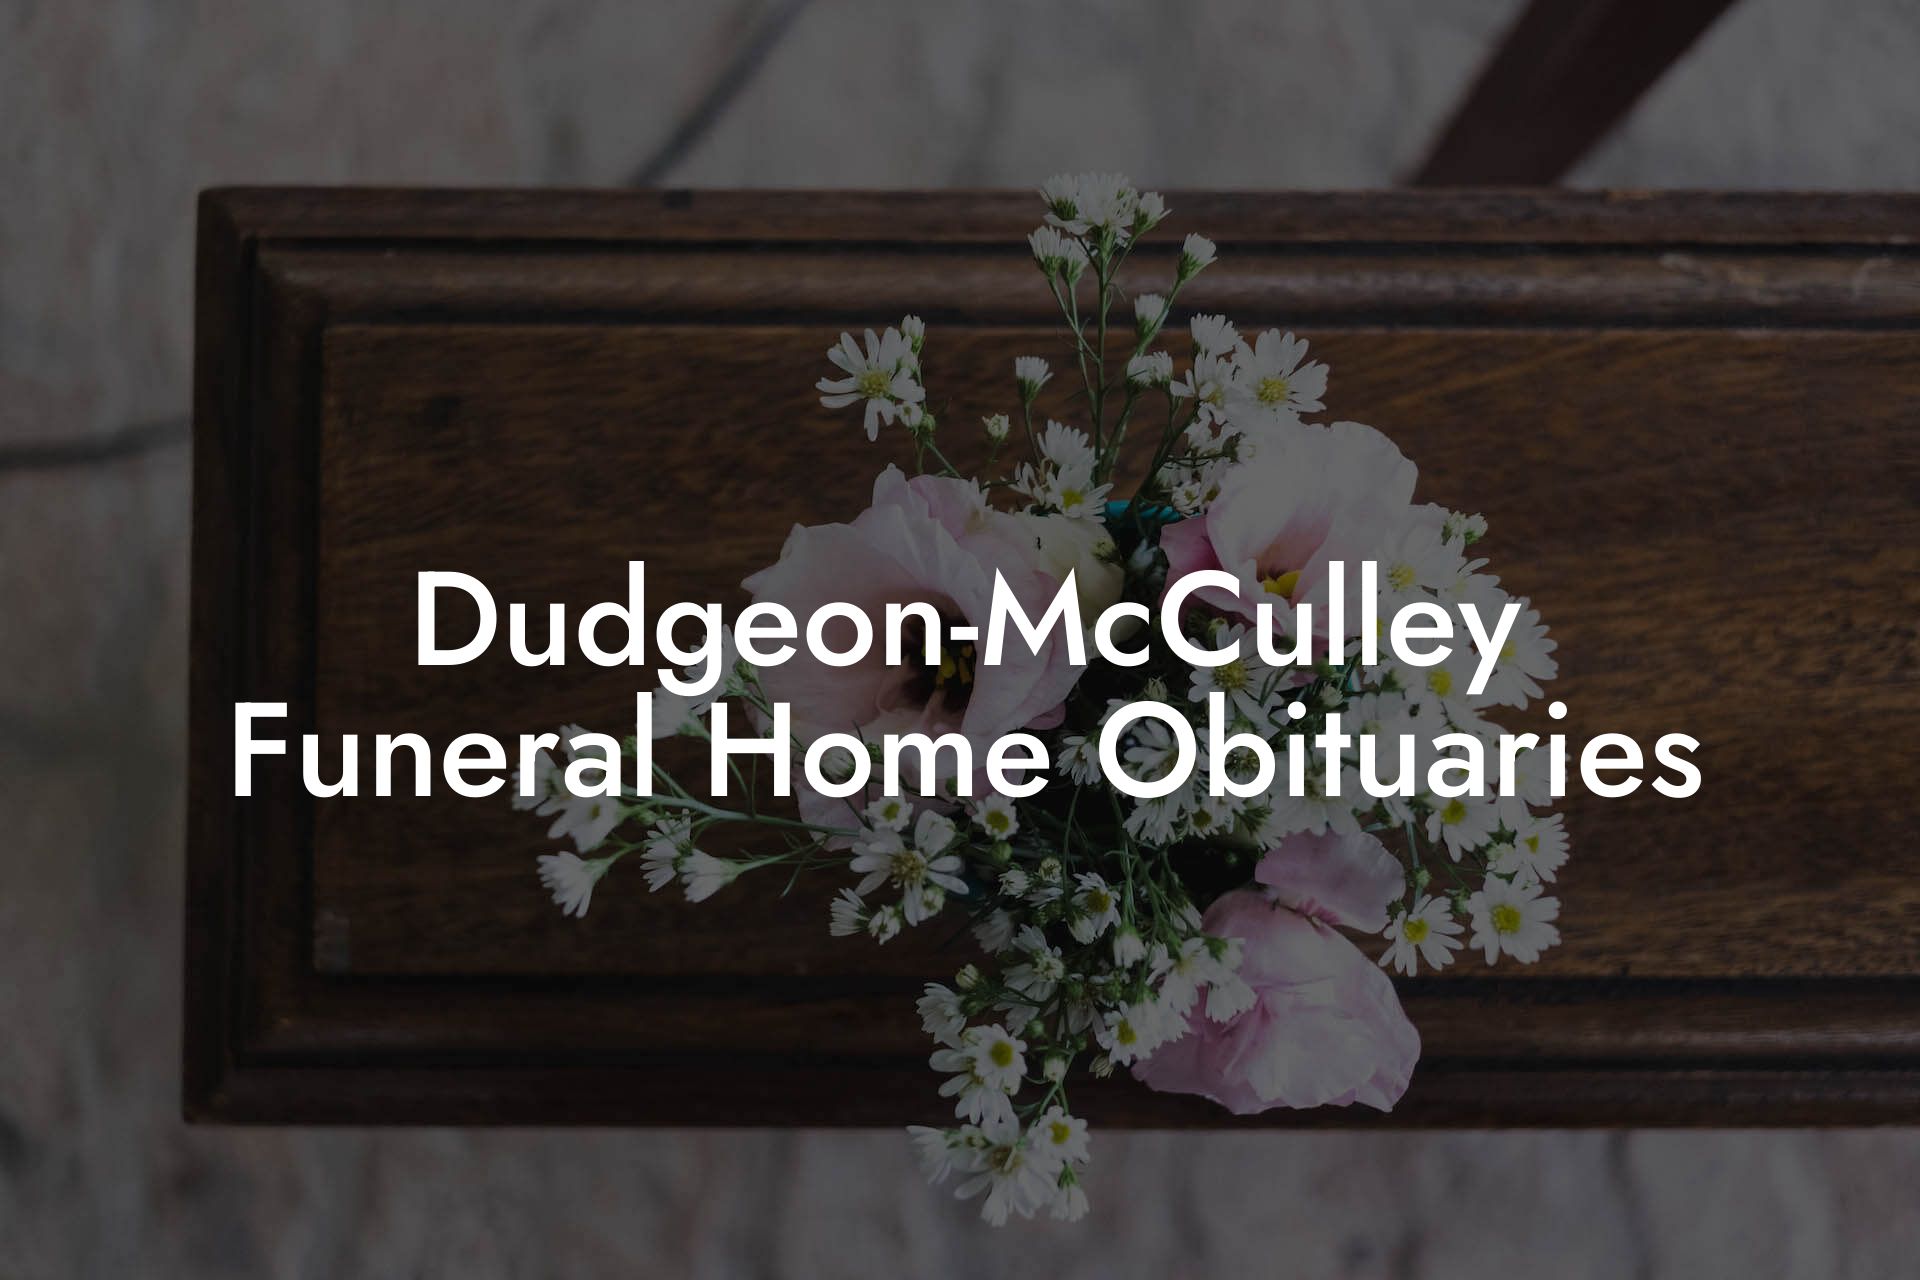 Dudgeon-McCulley Funeral Home Obituaries